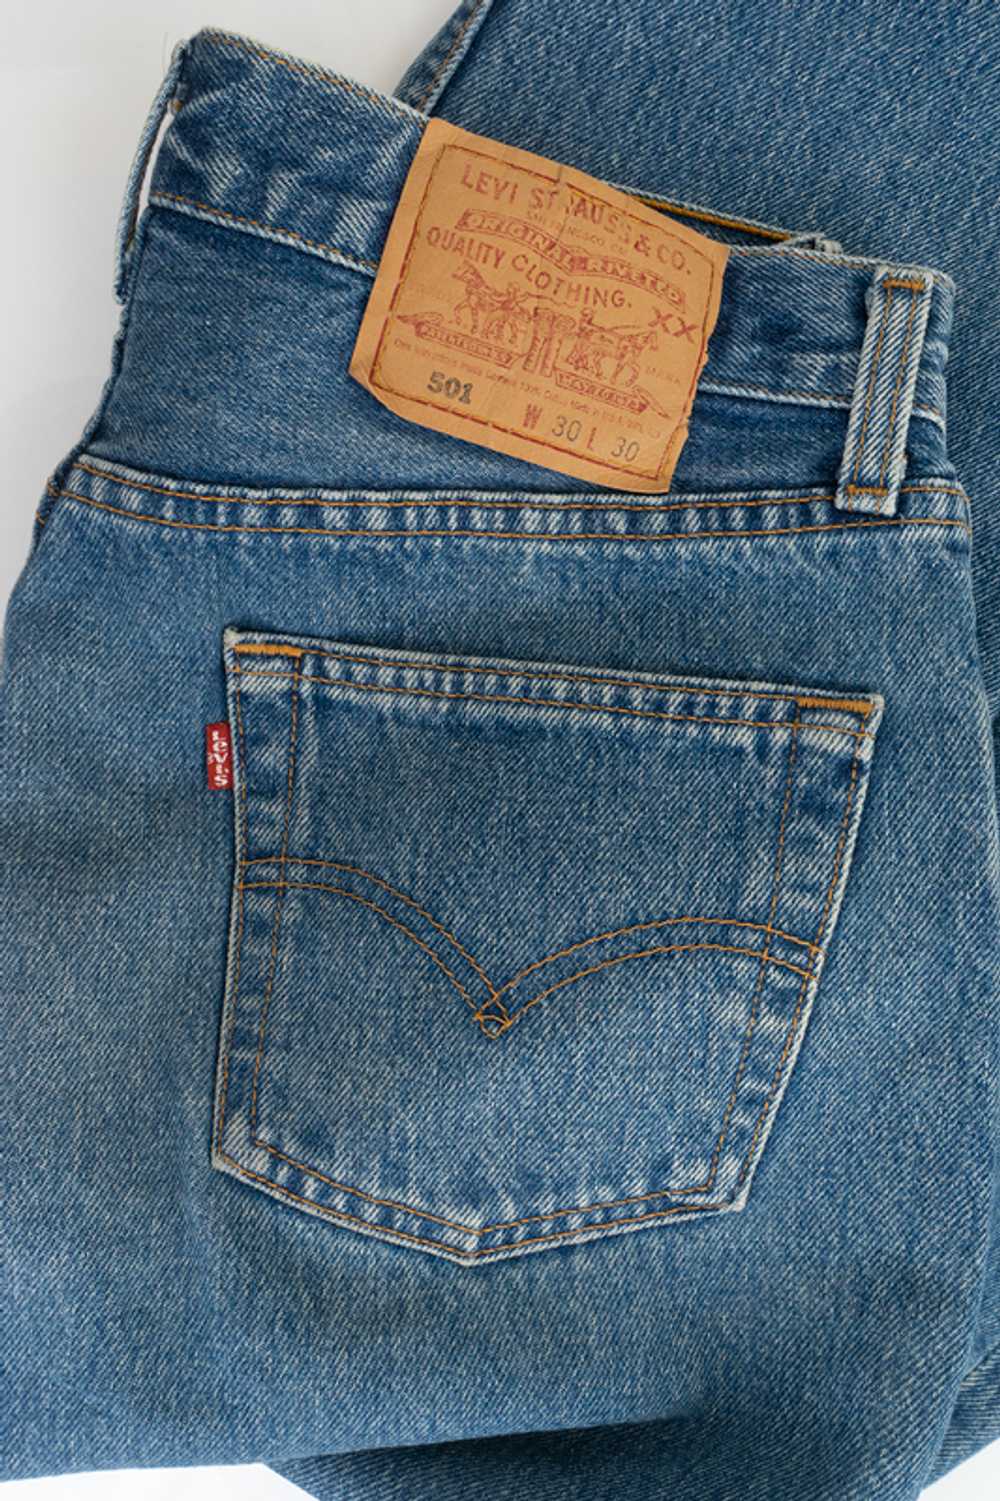 1990s Levi's 501 Button Fly Jeans - image 3